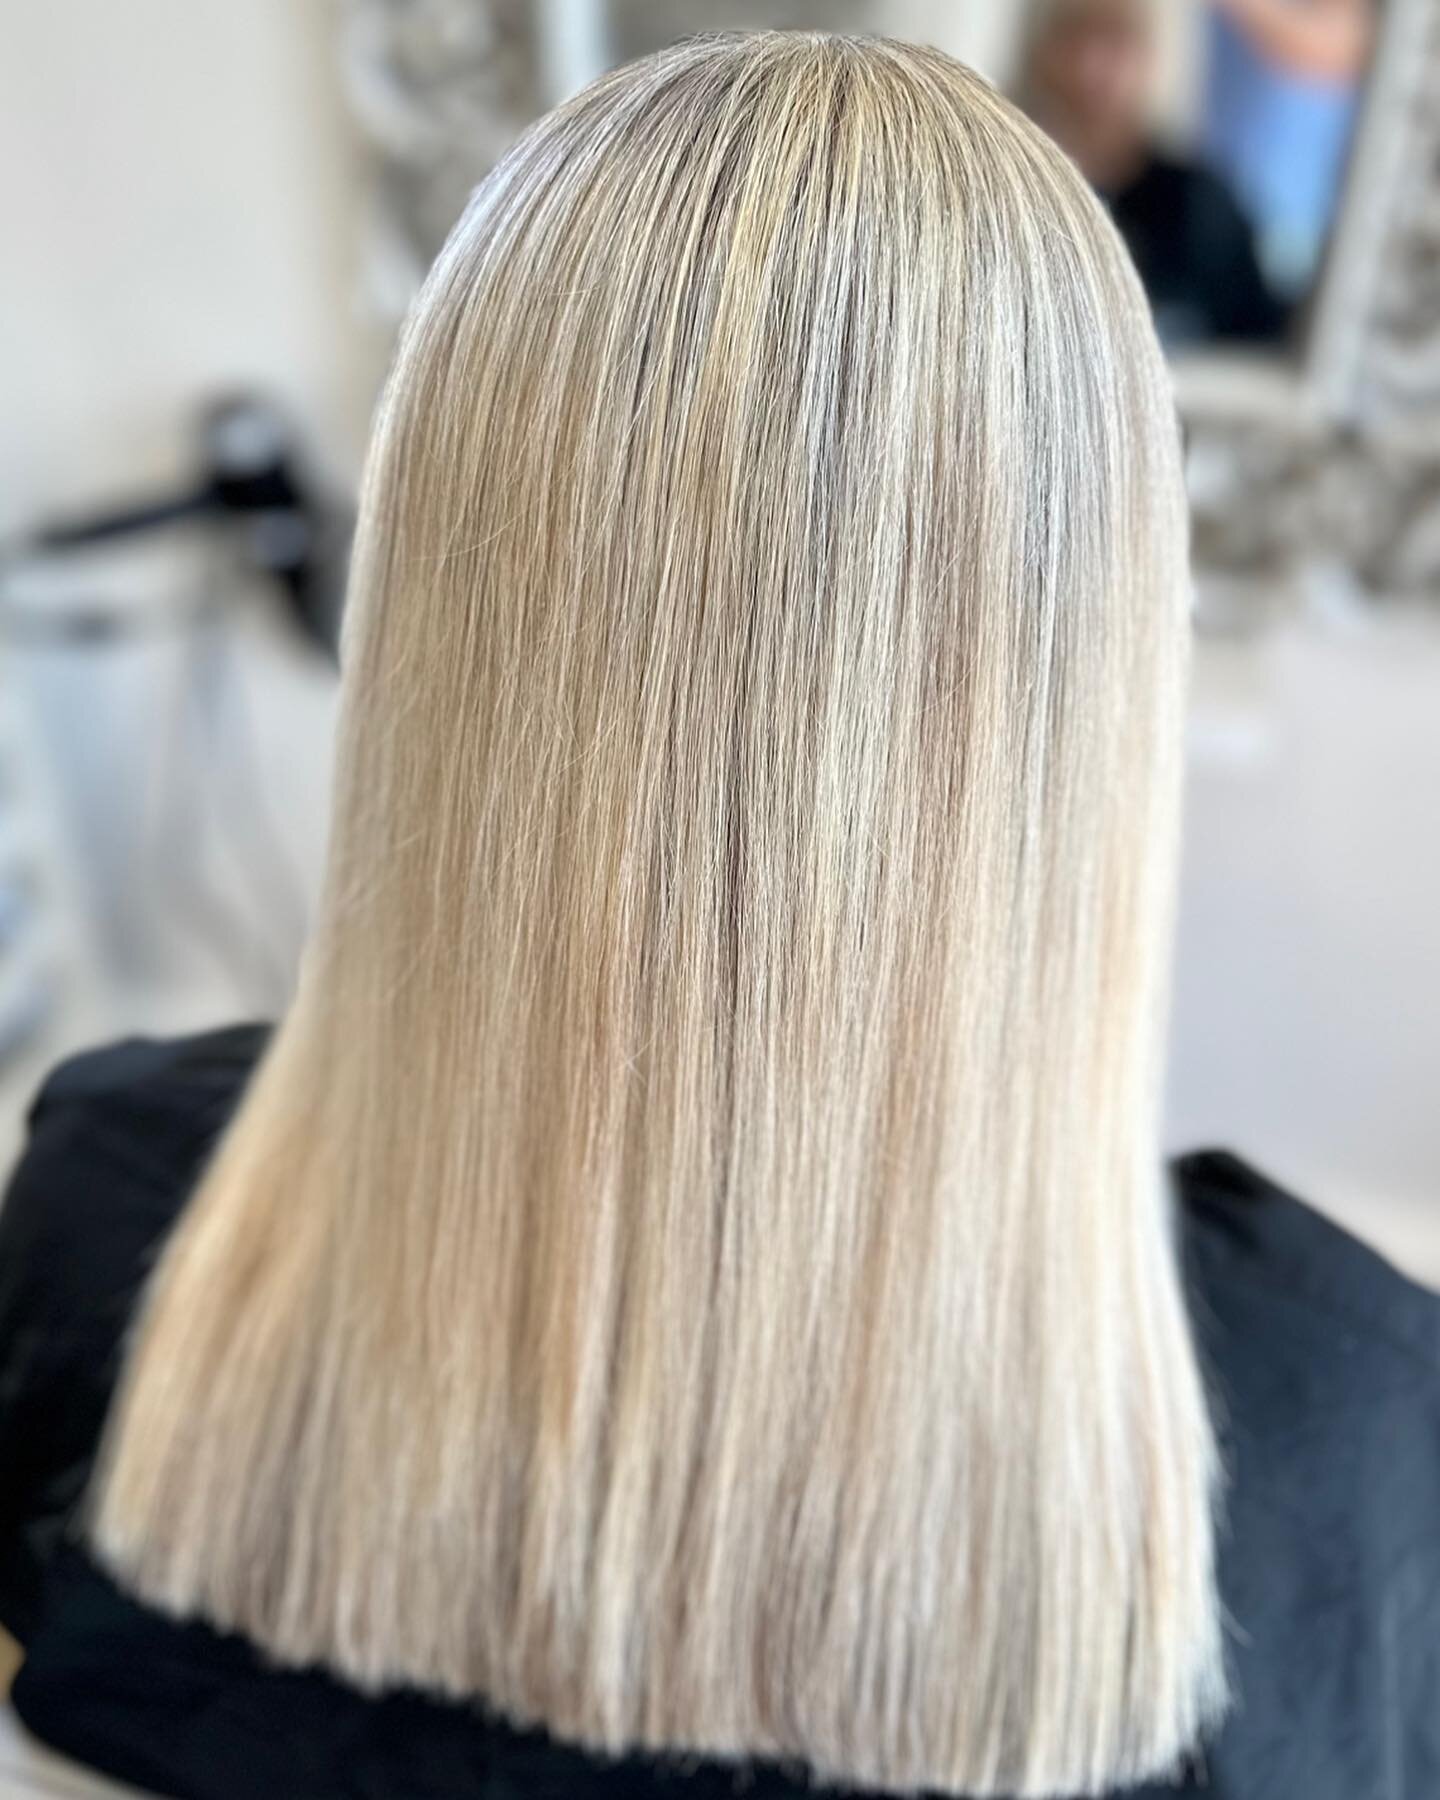 Foil highlights to lift natural colour and add lighter tones. 

Hair by - Deena 
Products used : @paulmitchell&nbsp;@paulmitchelluk @xgcolour #olaplex
⏰ &nbsp;Please be aware that any new colour clients require a essential skin test 48 hours prior to